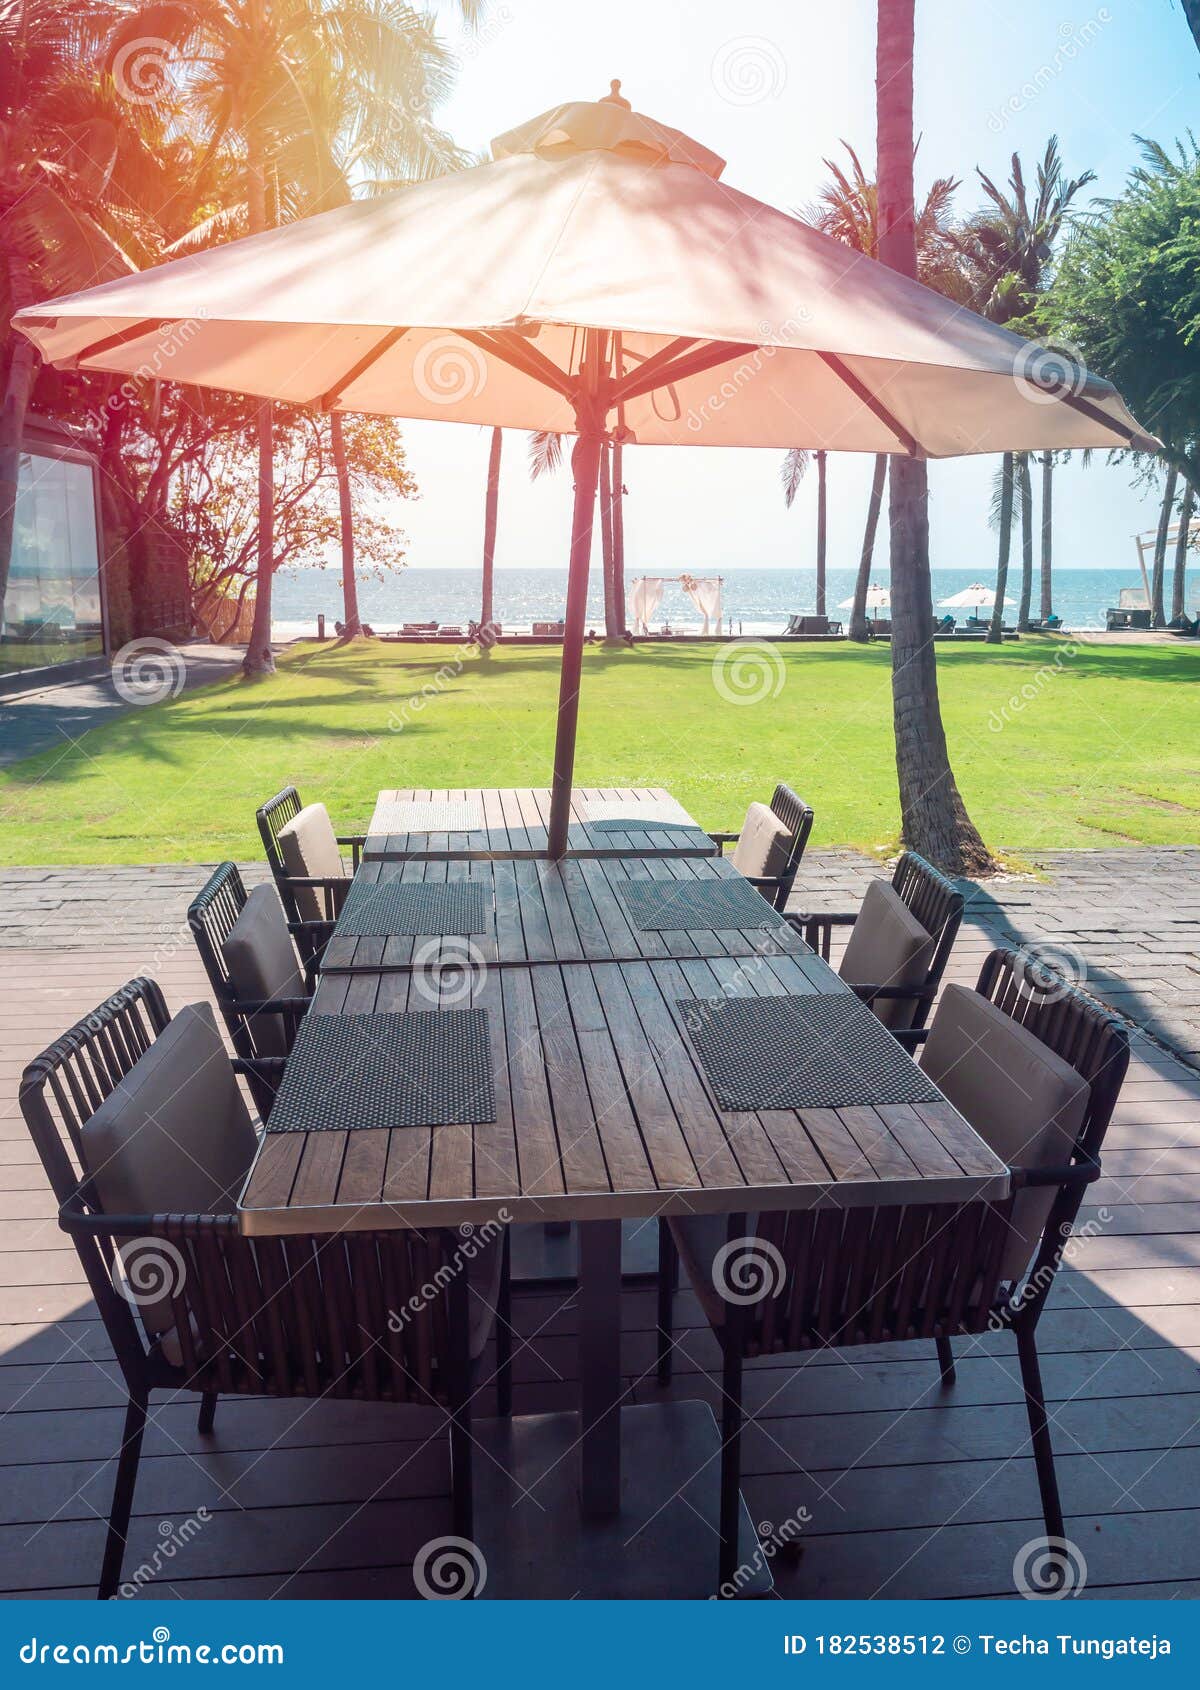 Wooden Dining Table And Chairs With Beach Umbrella With Sea View Stock Photo Image Of Chairs Breakfast 182538512